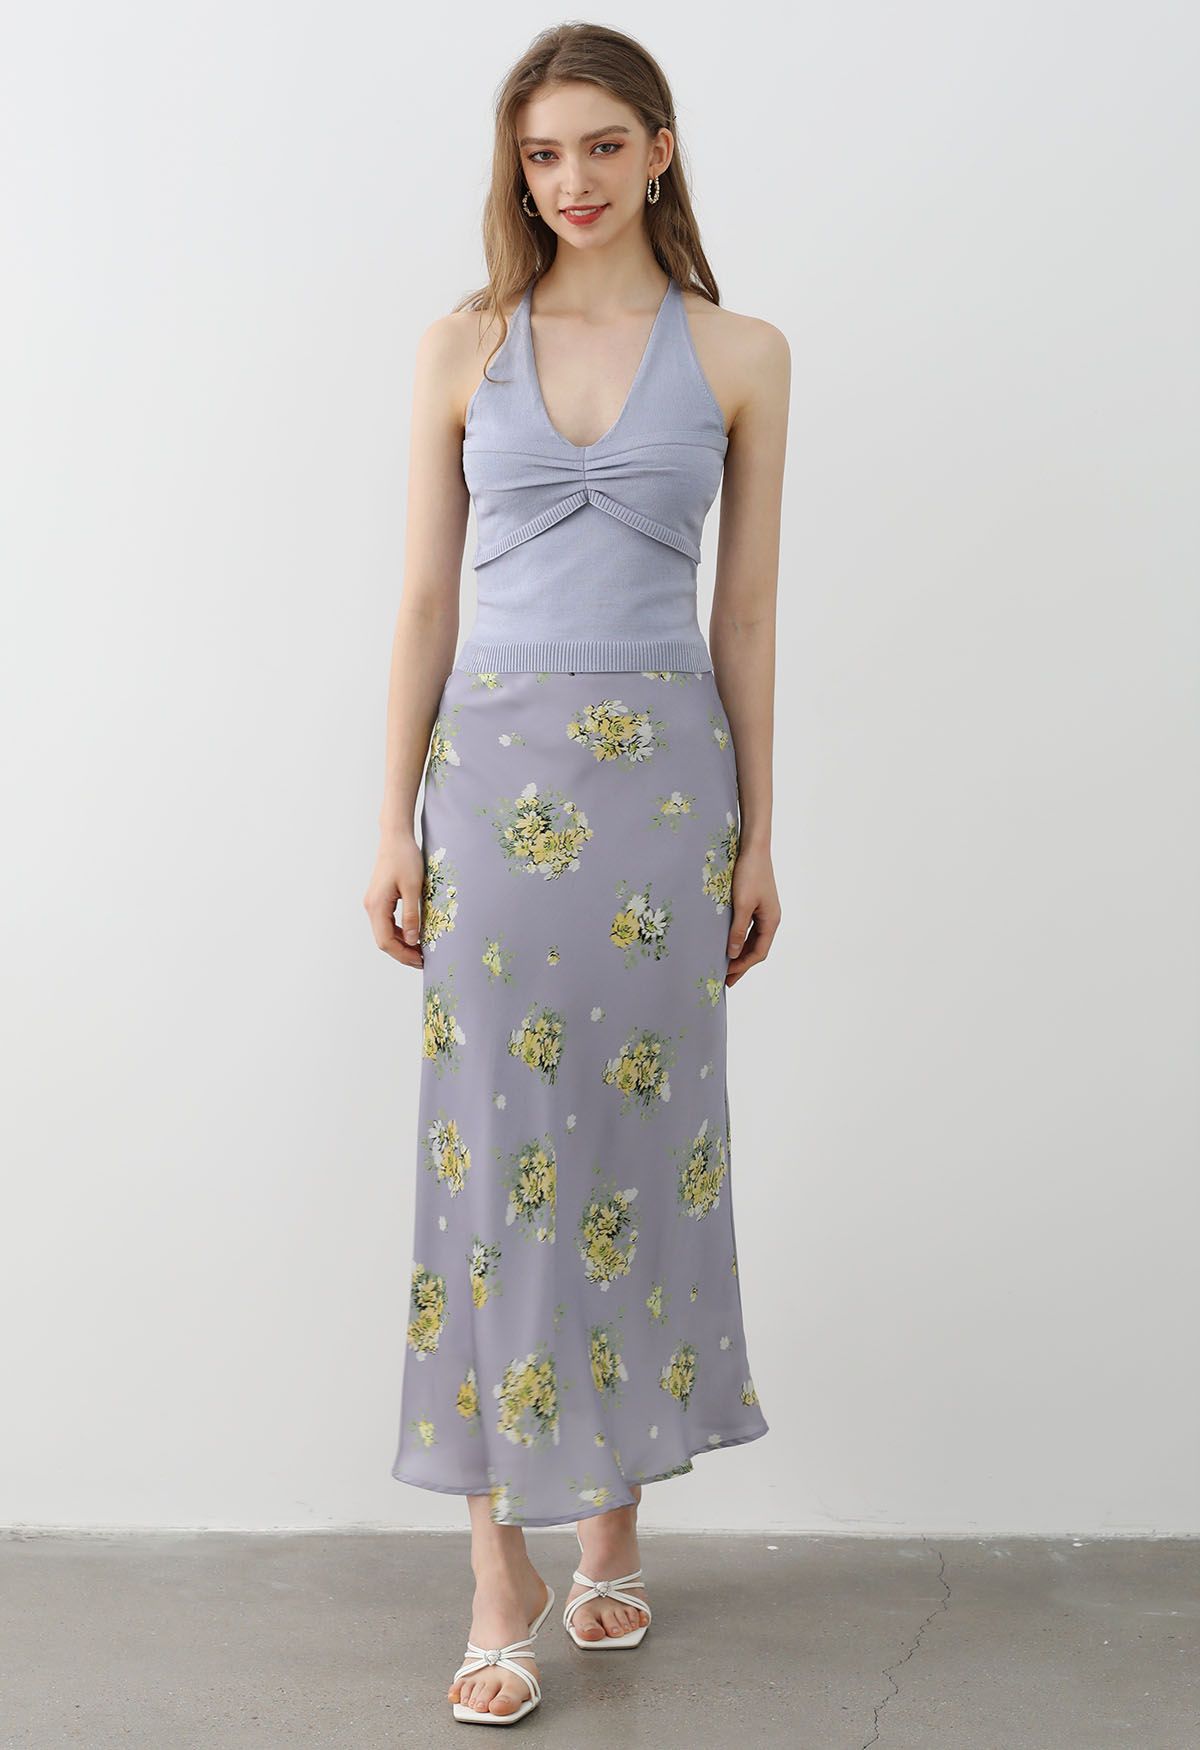 Summery Posy Print Maxi Skirt in Lavender